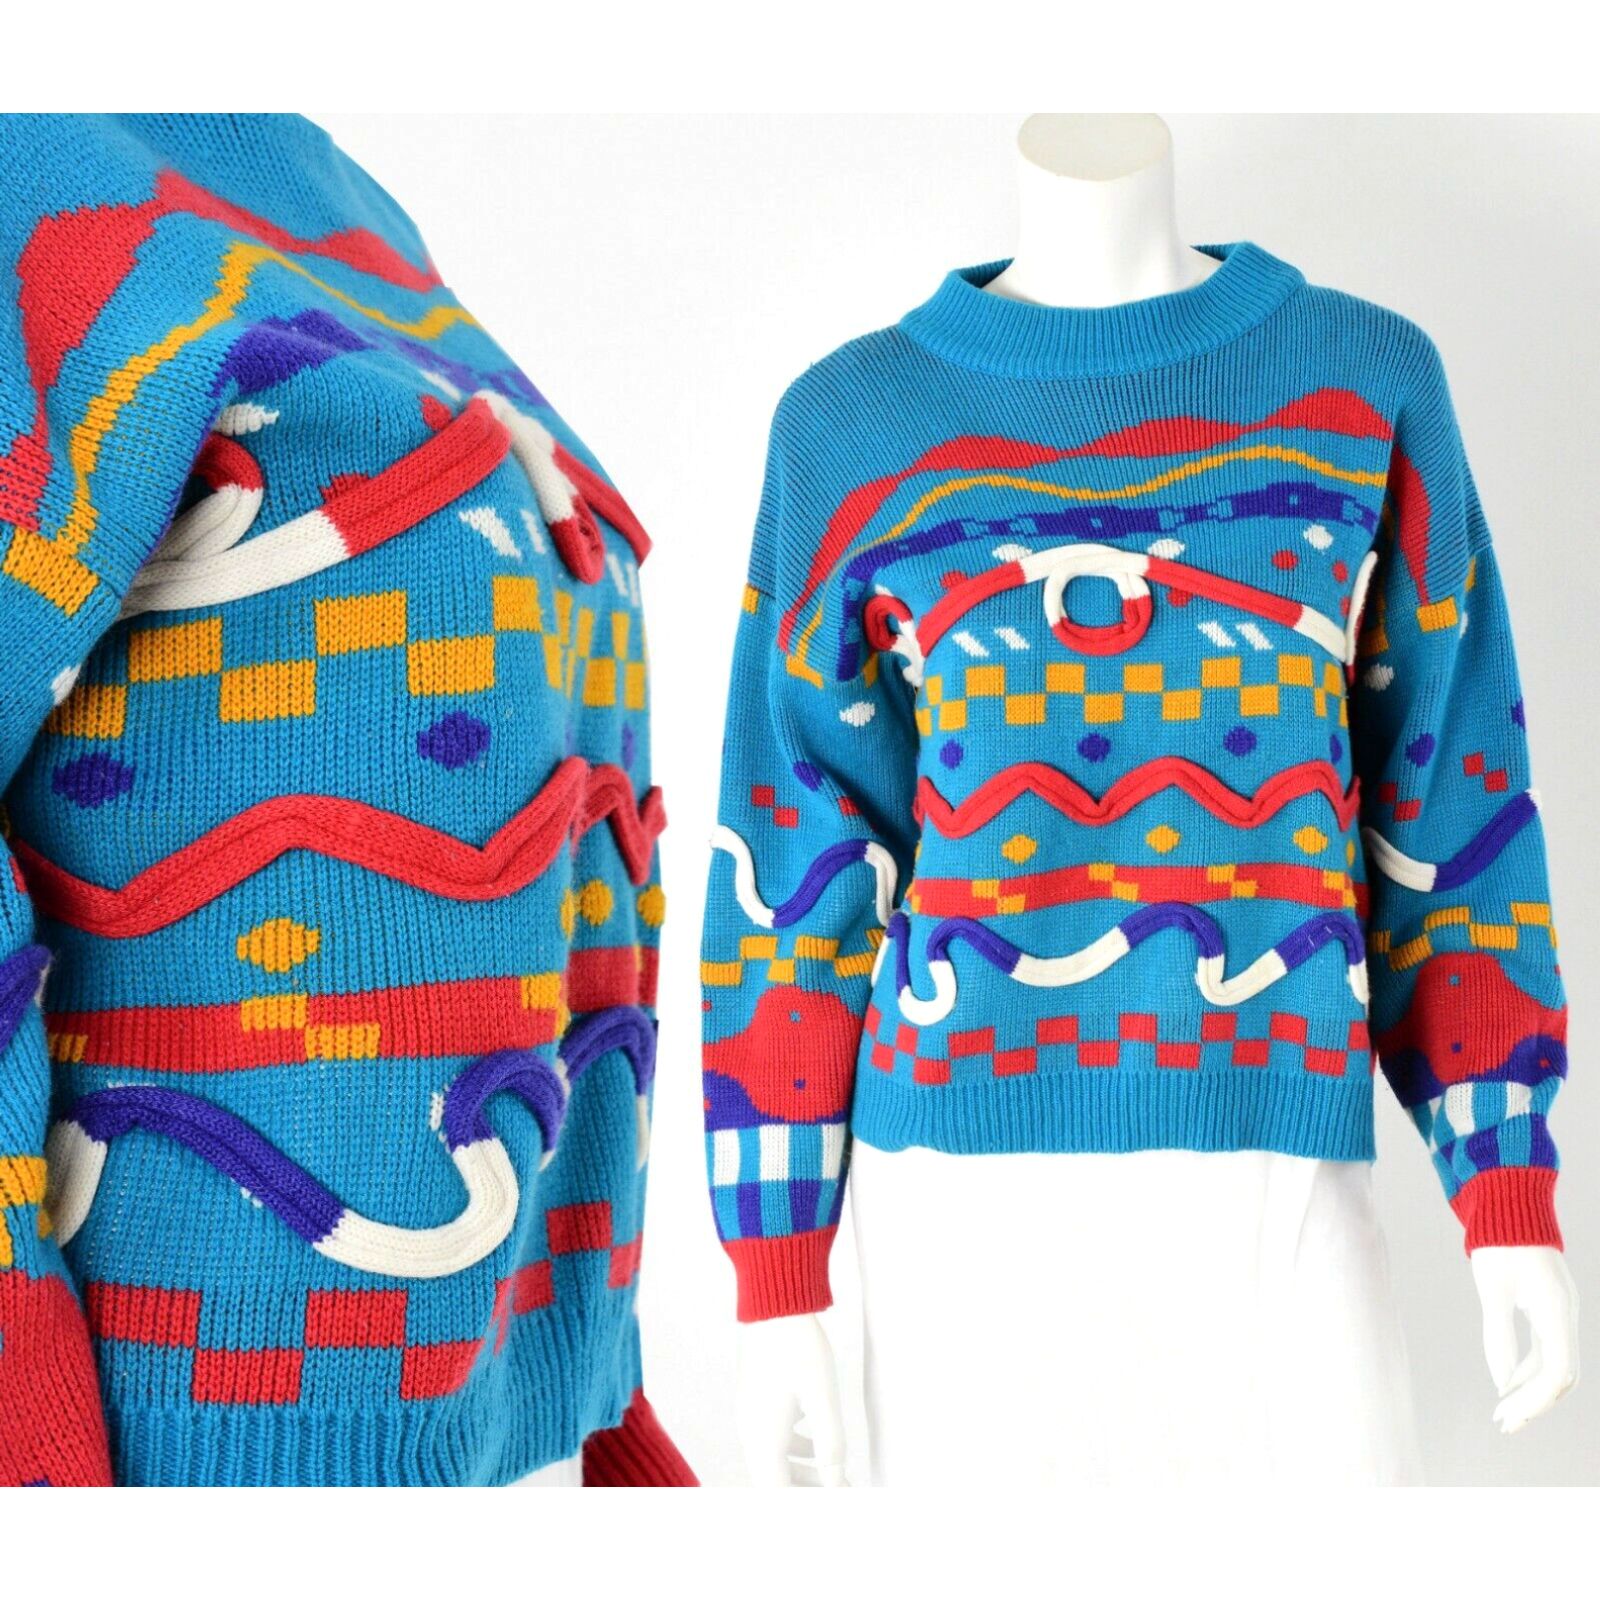 Vintage 90s Vintage Novelty Sweater Geometric Artsy Colorful Womens M Oversized Hip Hop Size M / US 6-8 / IT 42-44 - 1 Preview